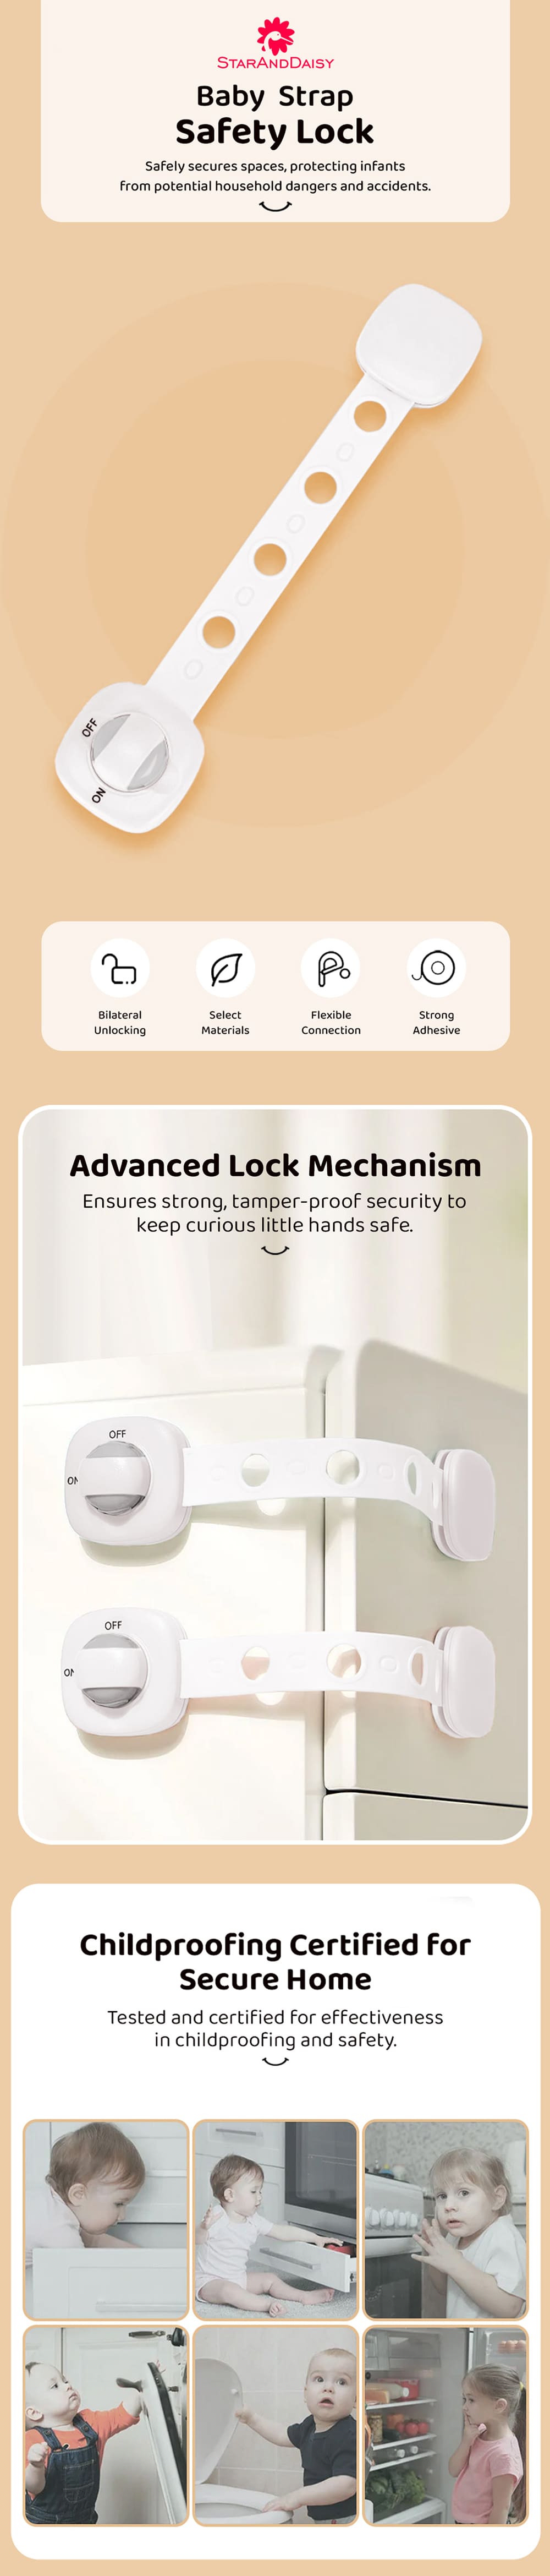 Large safety lock Flexible and secure locking